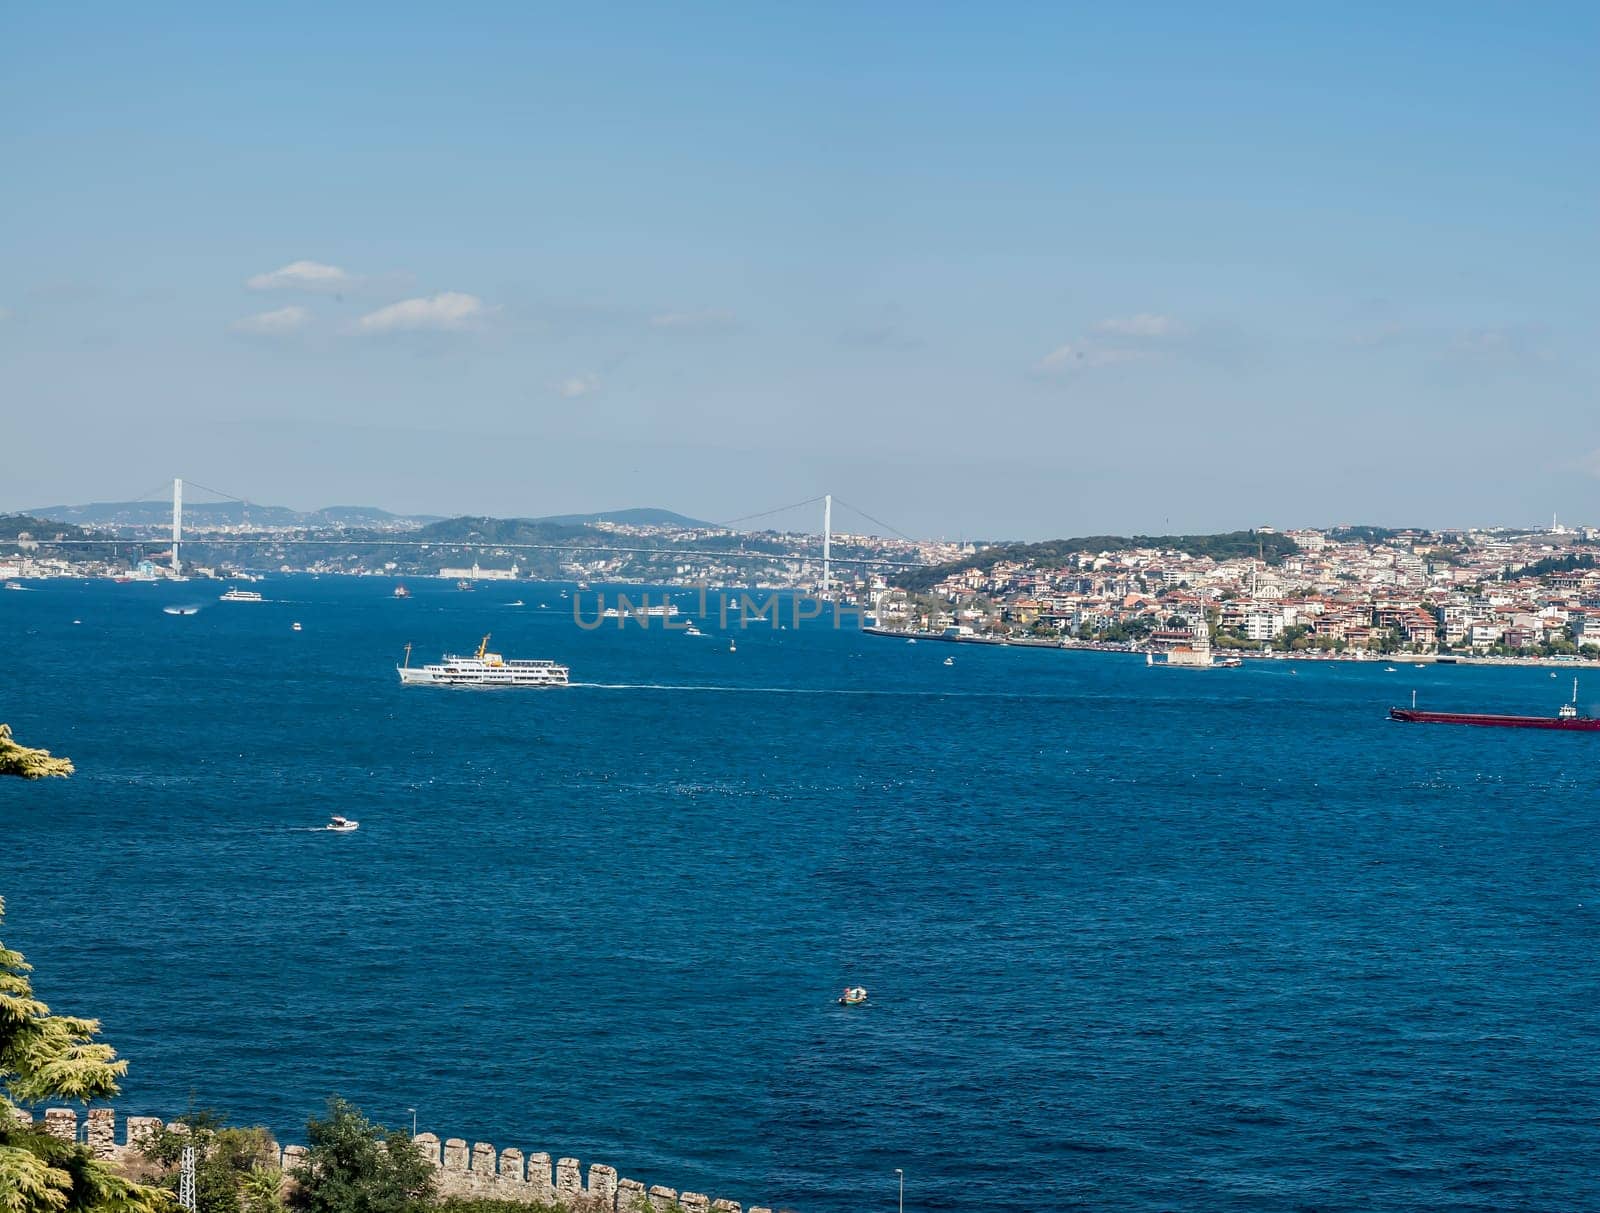 Panoramic view of the Bosphorus. The strait that connects the Black Sea to the Sea of Marmara and marks the boundary between the Europe and the Asia